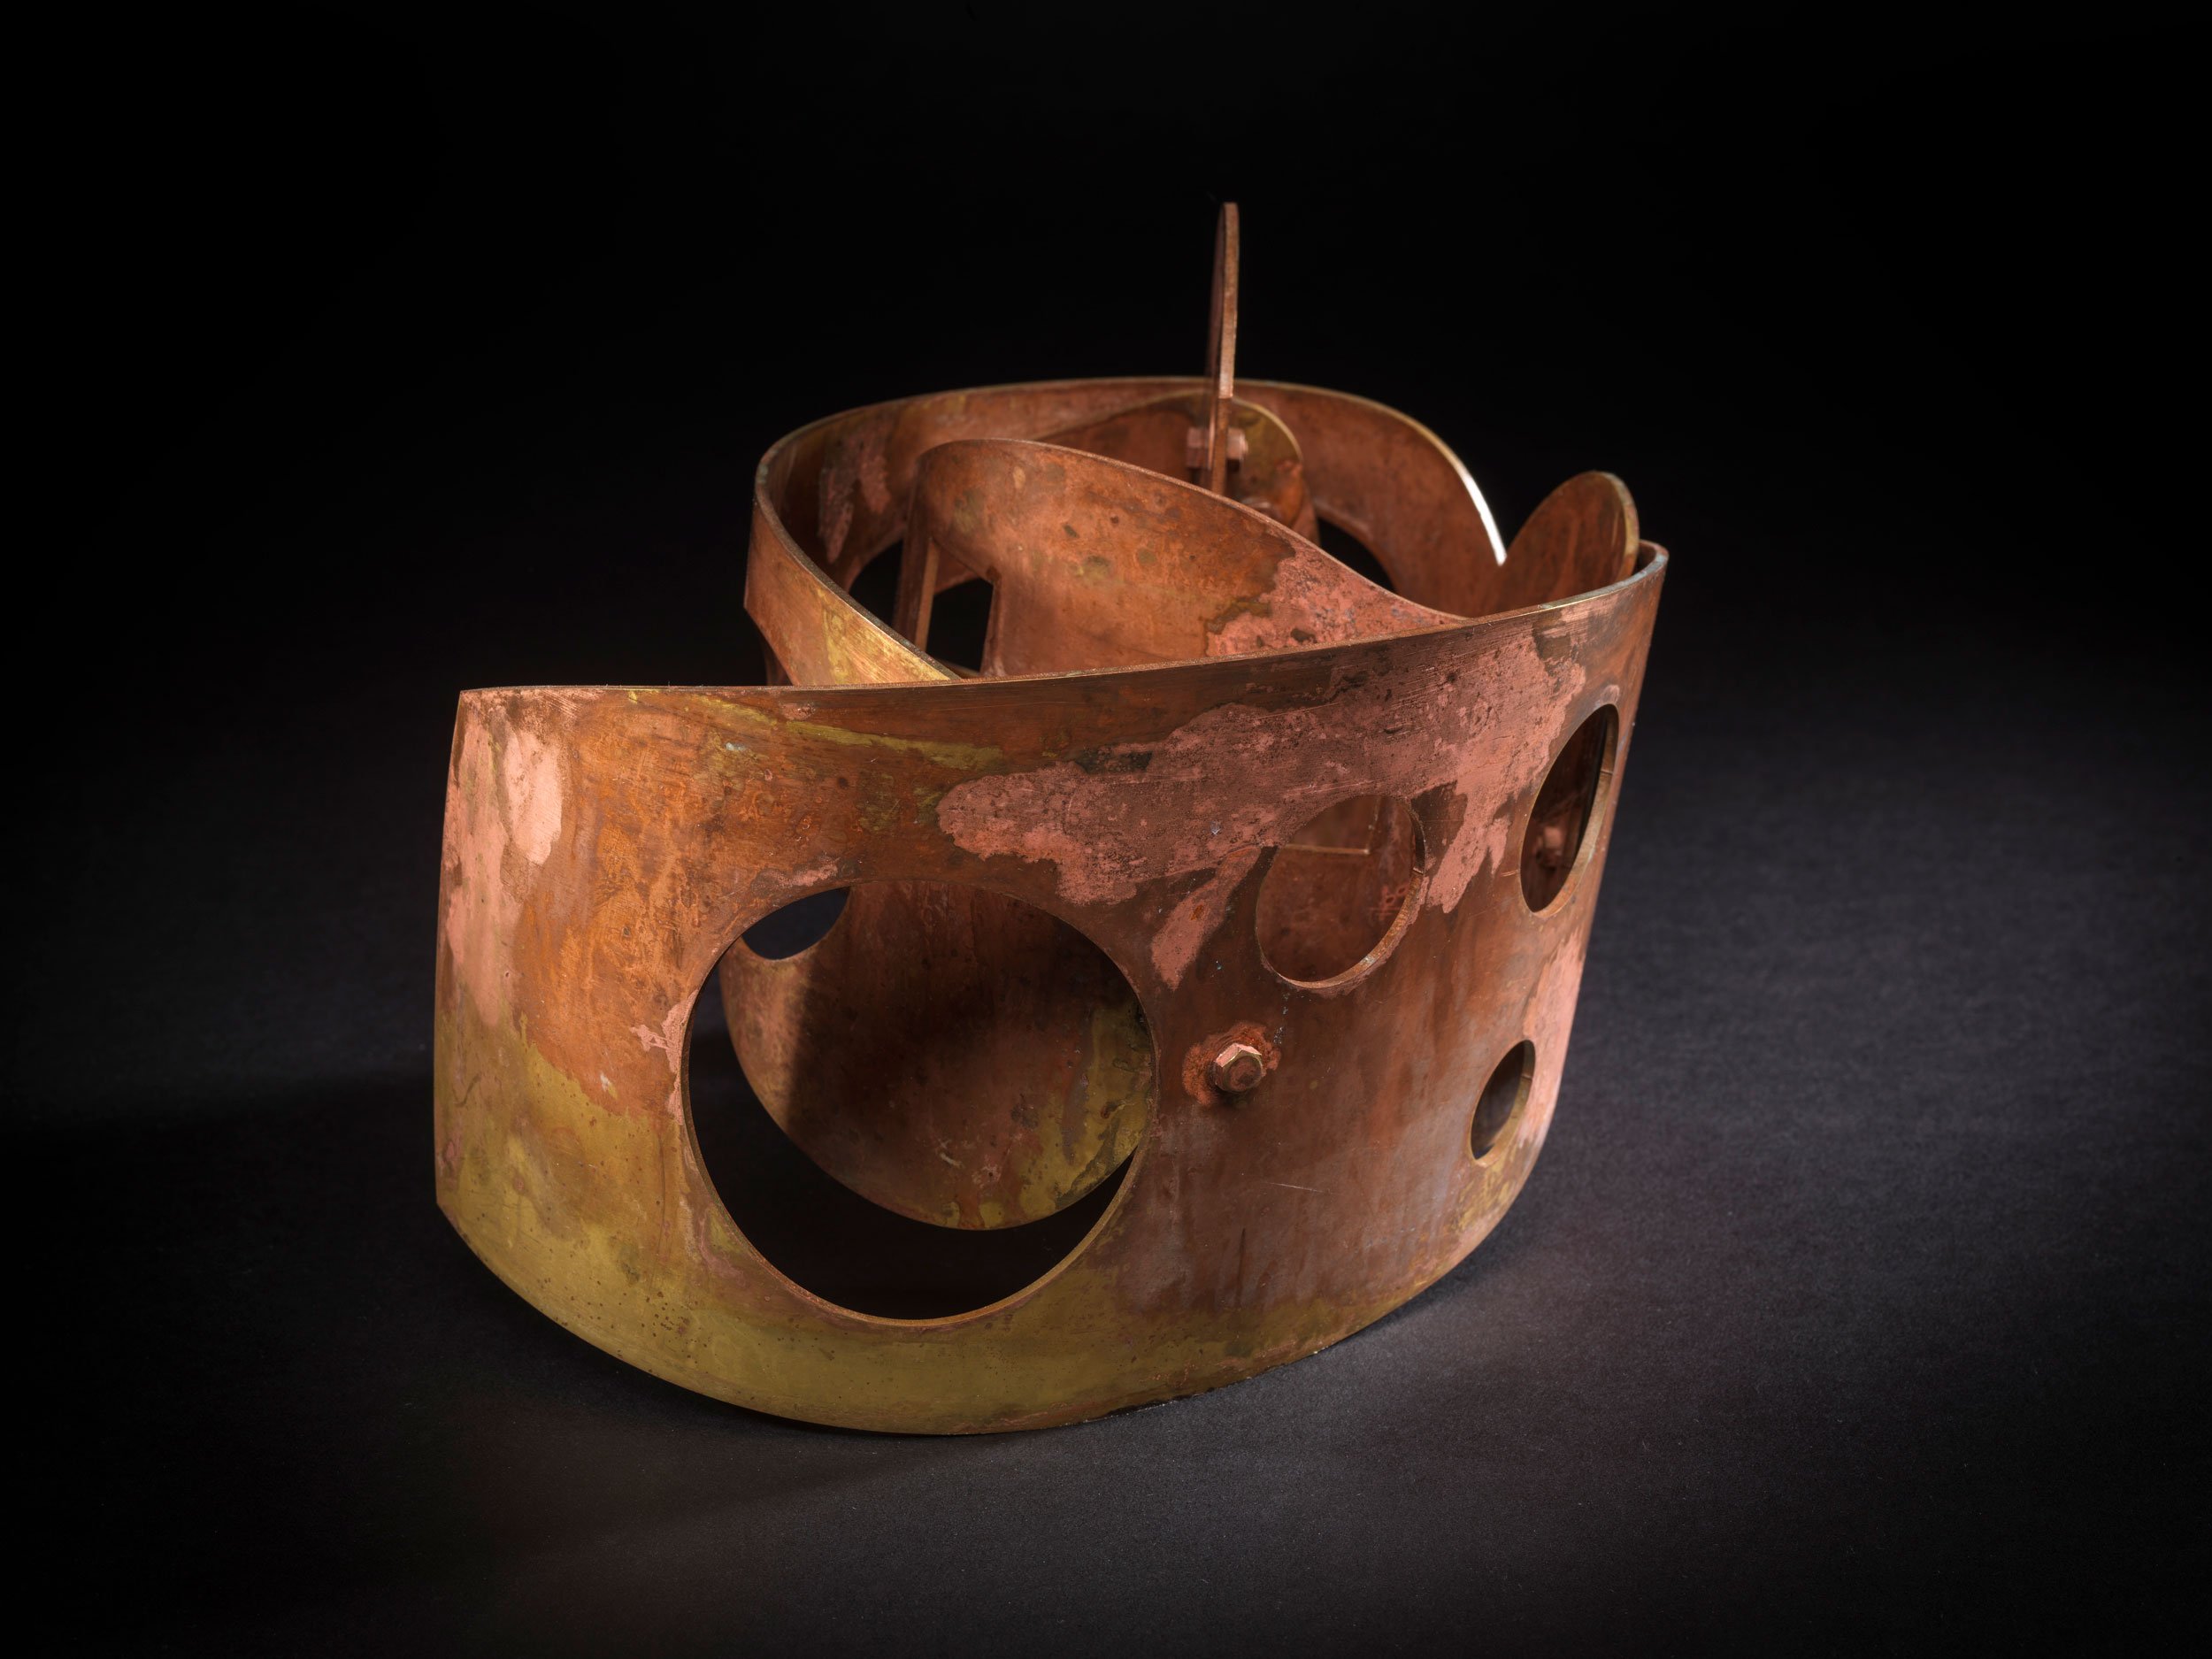 Act-of-Instance-No.-5,-2020,-patinated-brass,-22x16x17cm,-JL270820_0097.jpg